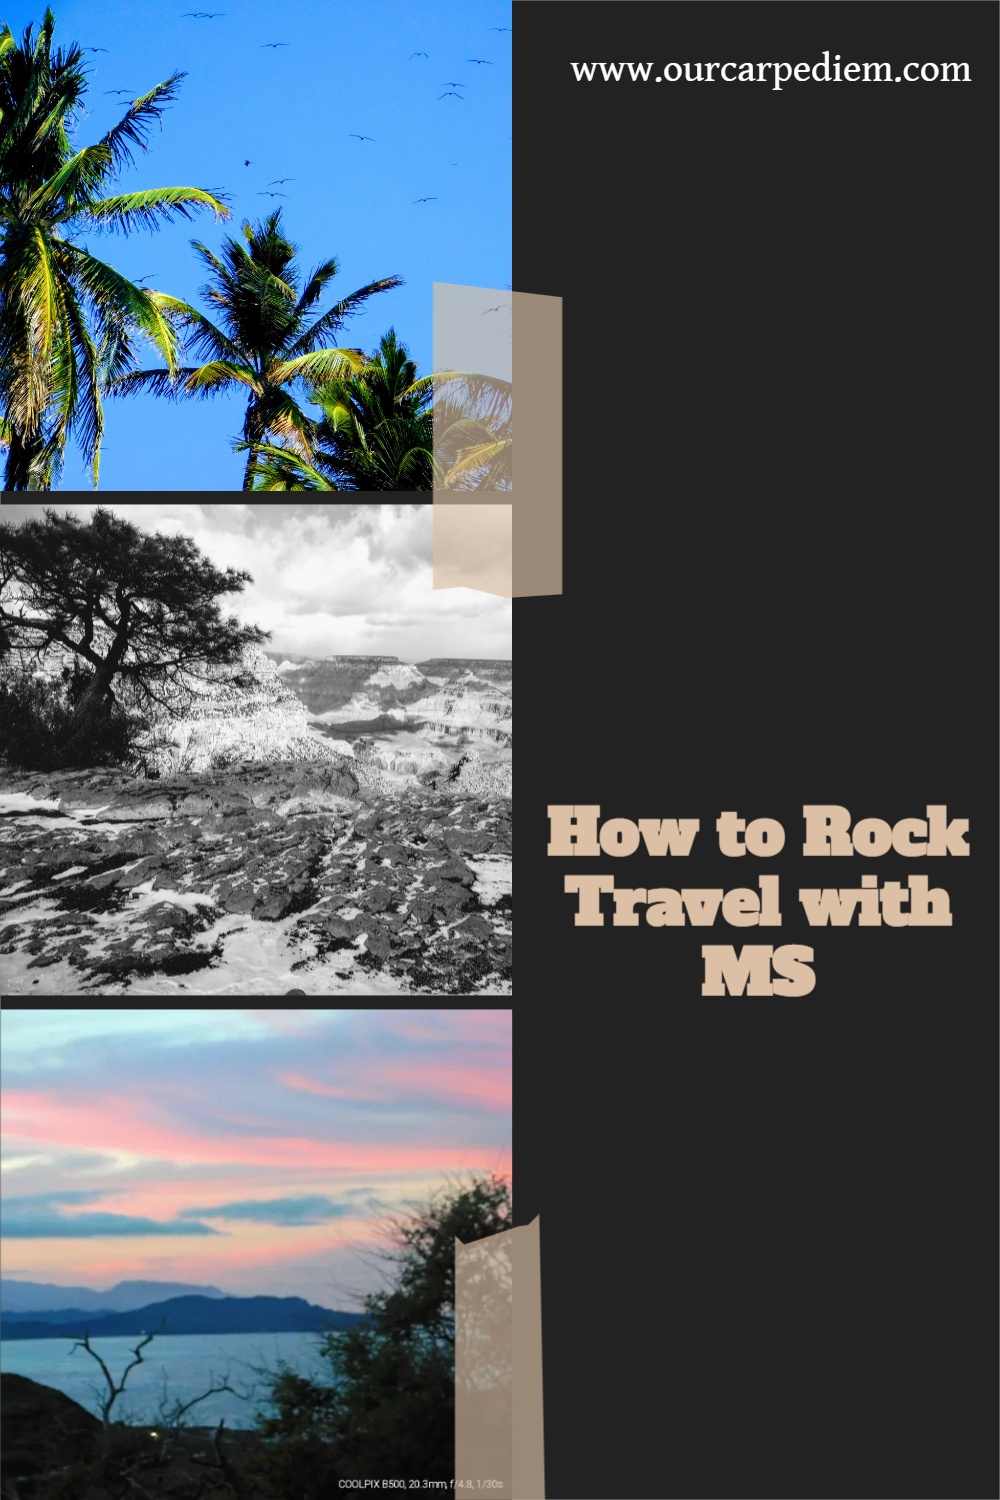 Travel With Multiple Sclerosis: Top 10 Tips After living with MS for decades, I share useful tips and experiences. Updated for the COVID19 pandemic. How to pack your medication? Can you use hiking poles as mobility aids for plane travel? Mistakes to avoid and lessons learned. Everything you need to know about MS and other spoonie travel #spoonies #traveltips #OurCarpeDiem #multiplesclerosis #disabilitytravel